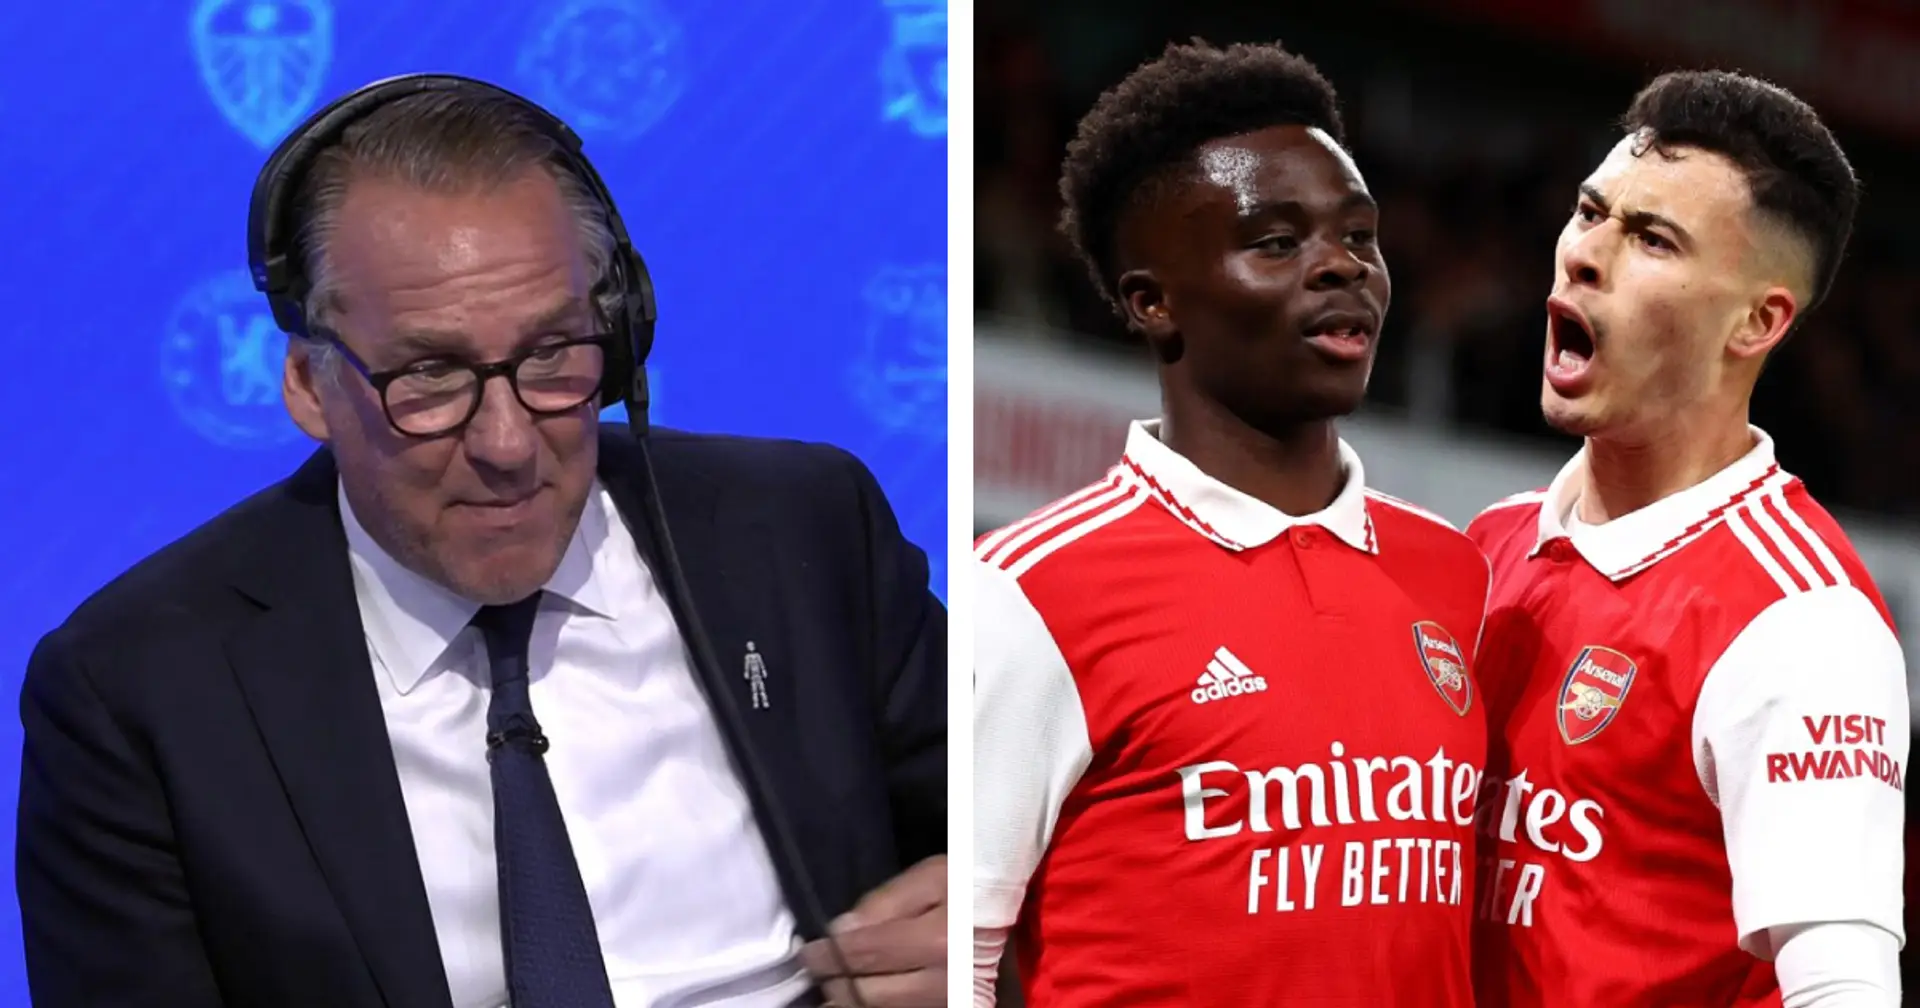 Paul Merson names one player who can beat Haaland to Golden Boot this season — not Saka or Martinelli